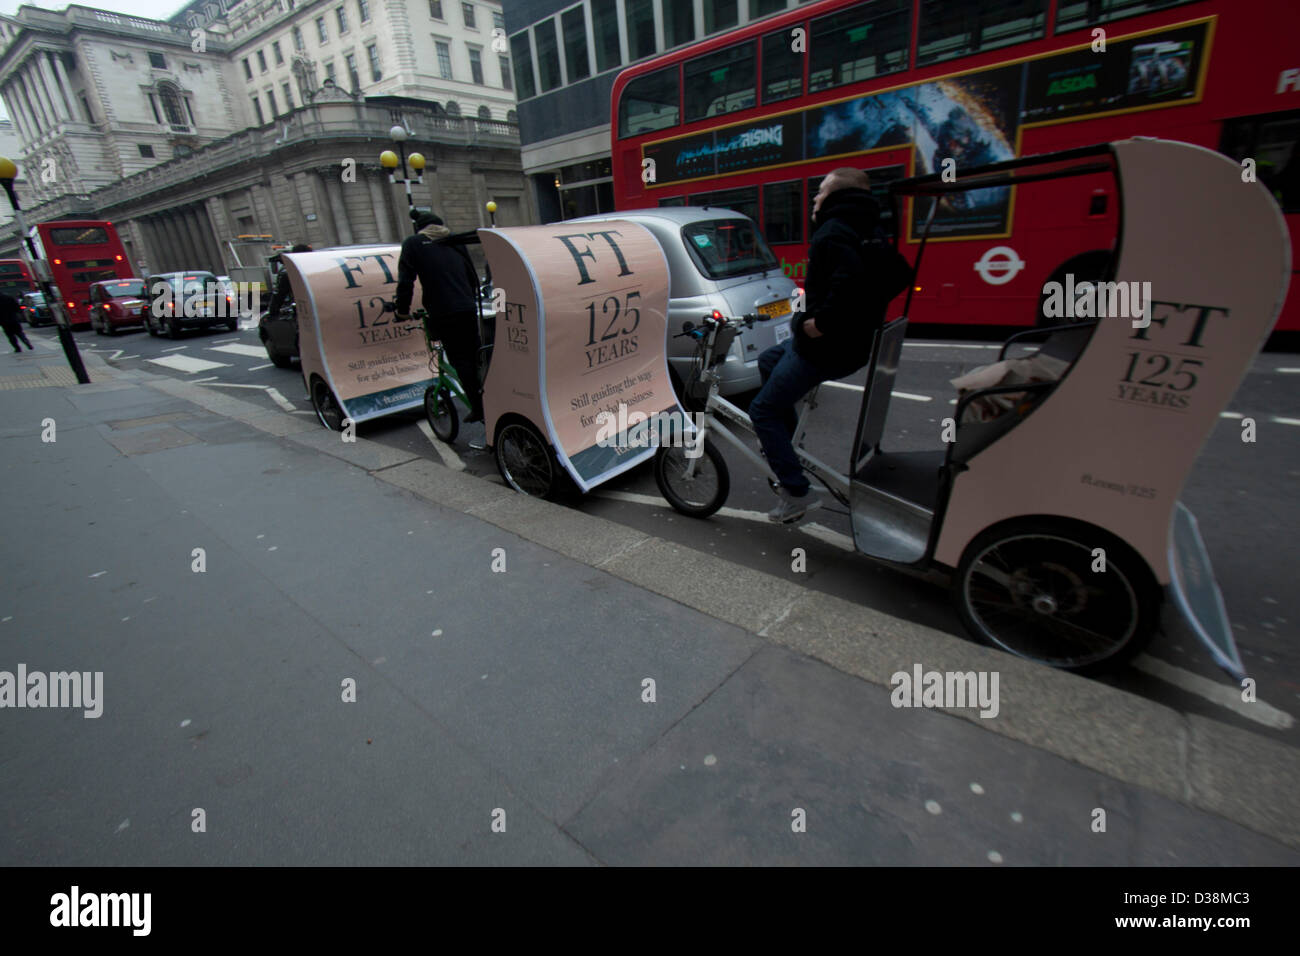 London, UK. 13th February 2013. Newspaper vendors on rickshaws distribute free copies of the first Financial Times in the city of London financial district. The Financial Times was first published on 13 February 1888 and celebrates its 125th anniversary with a special edition. Amer Ghazzal / Alamy Live News Stock Photo